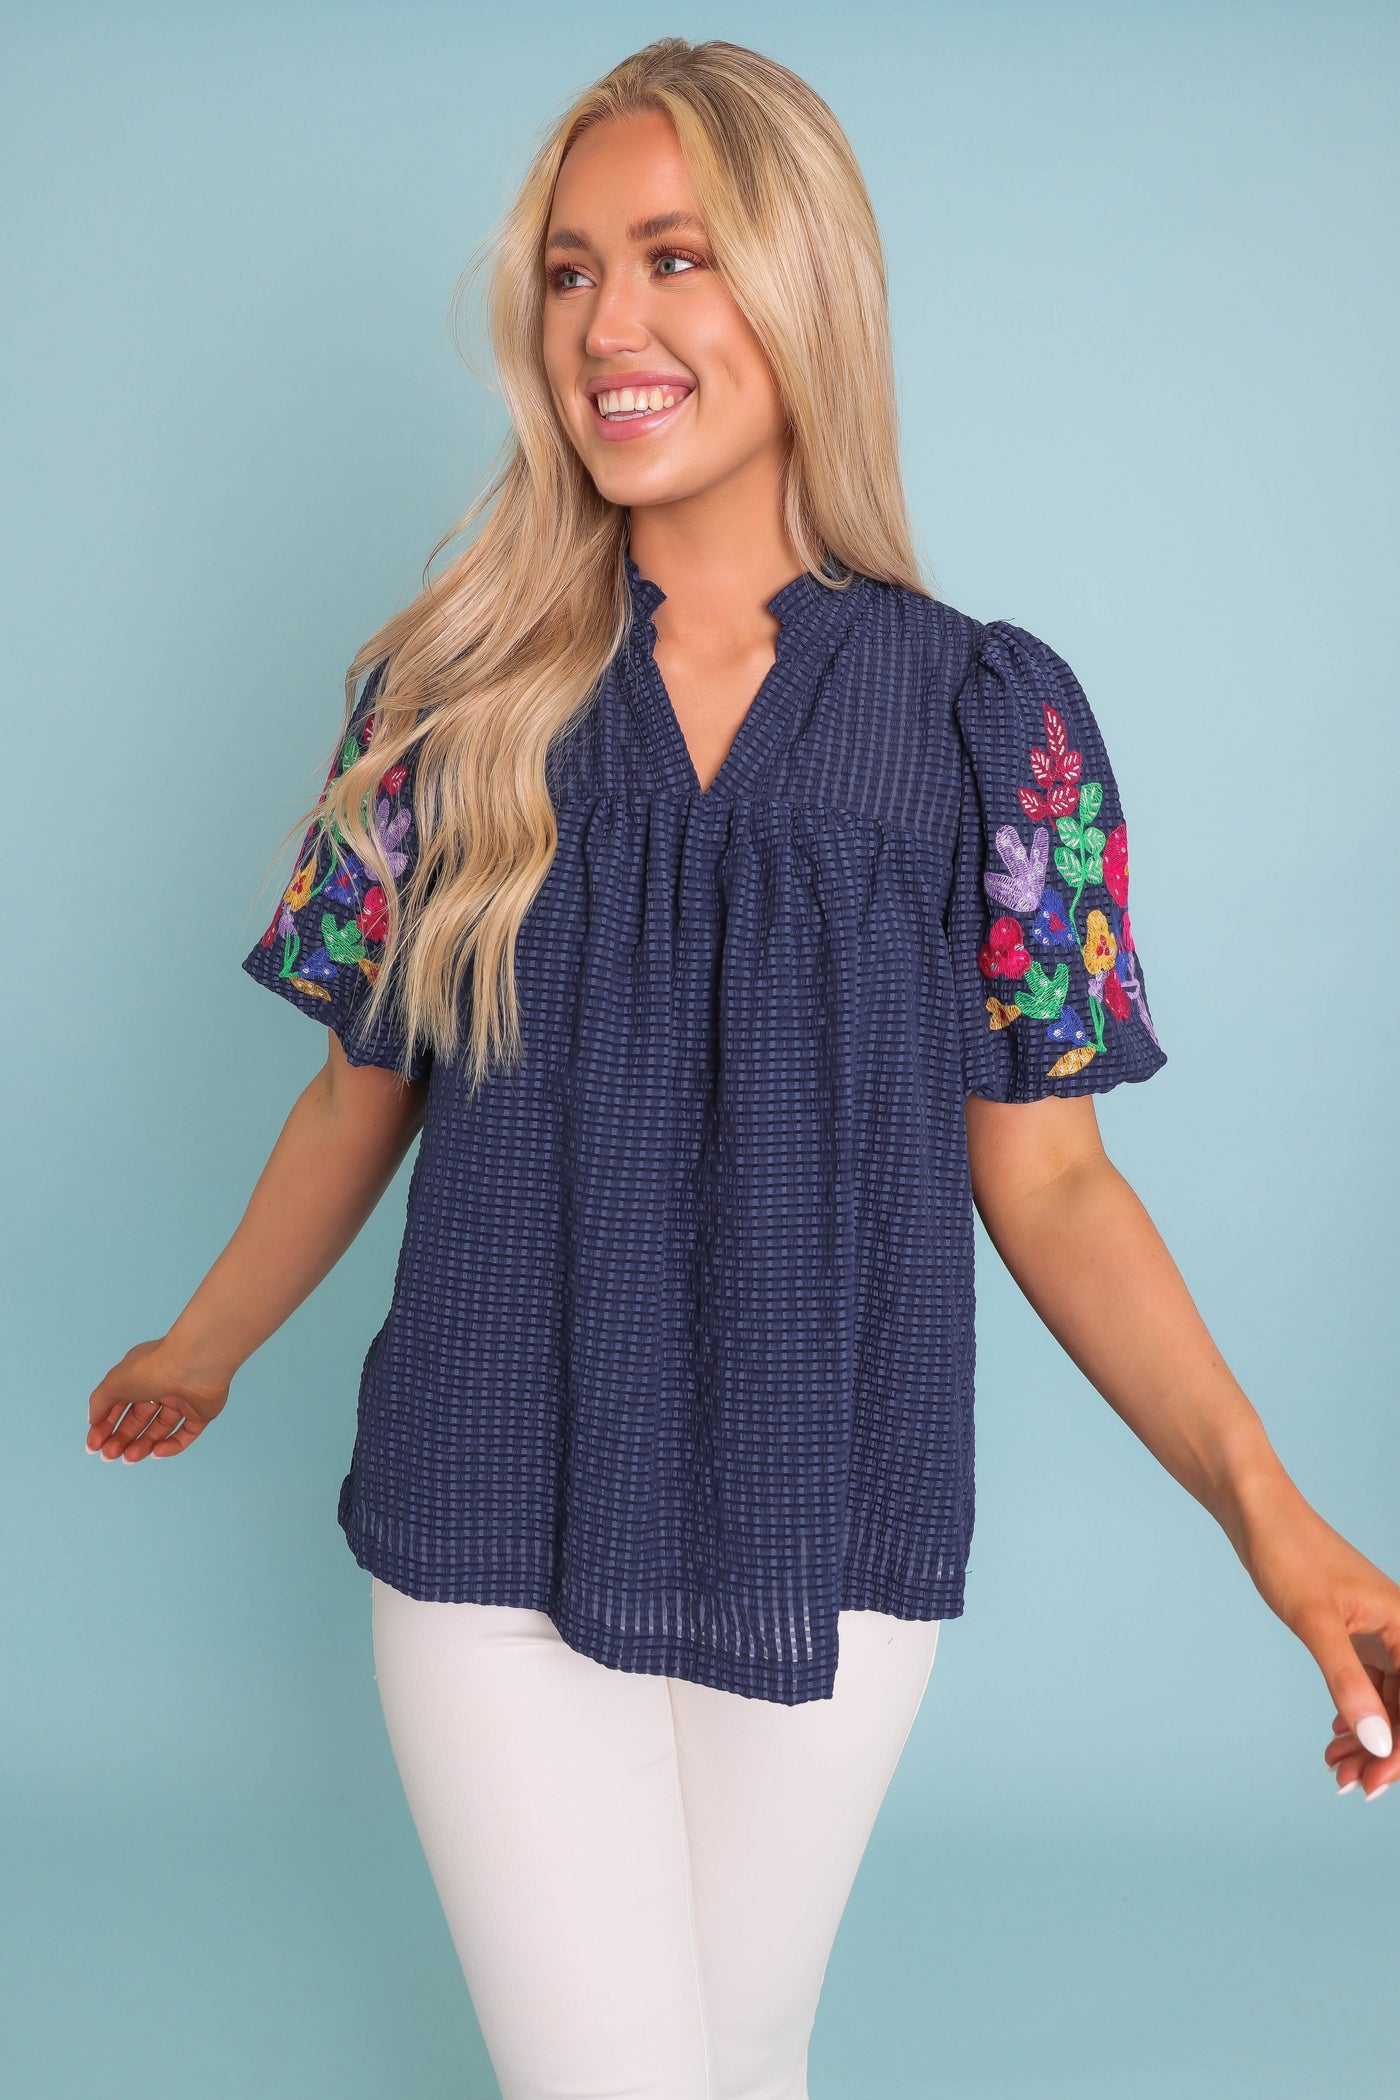 RESTOCK: Blossoming Into More Blouse-Navy